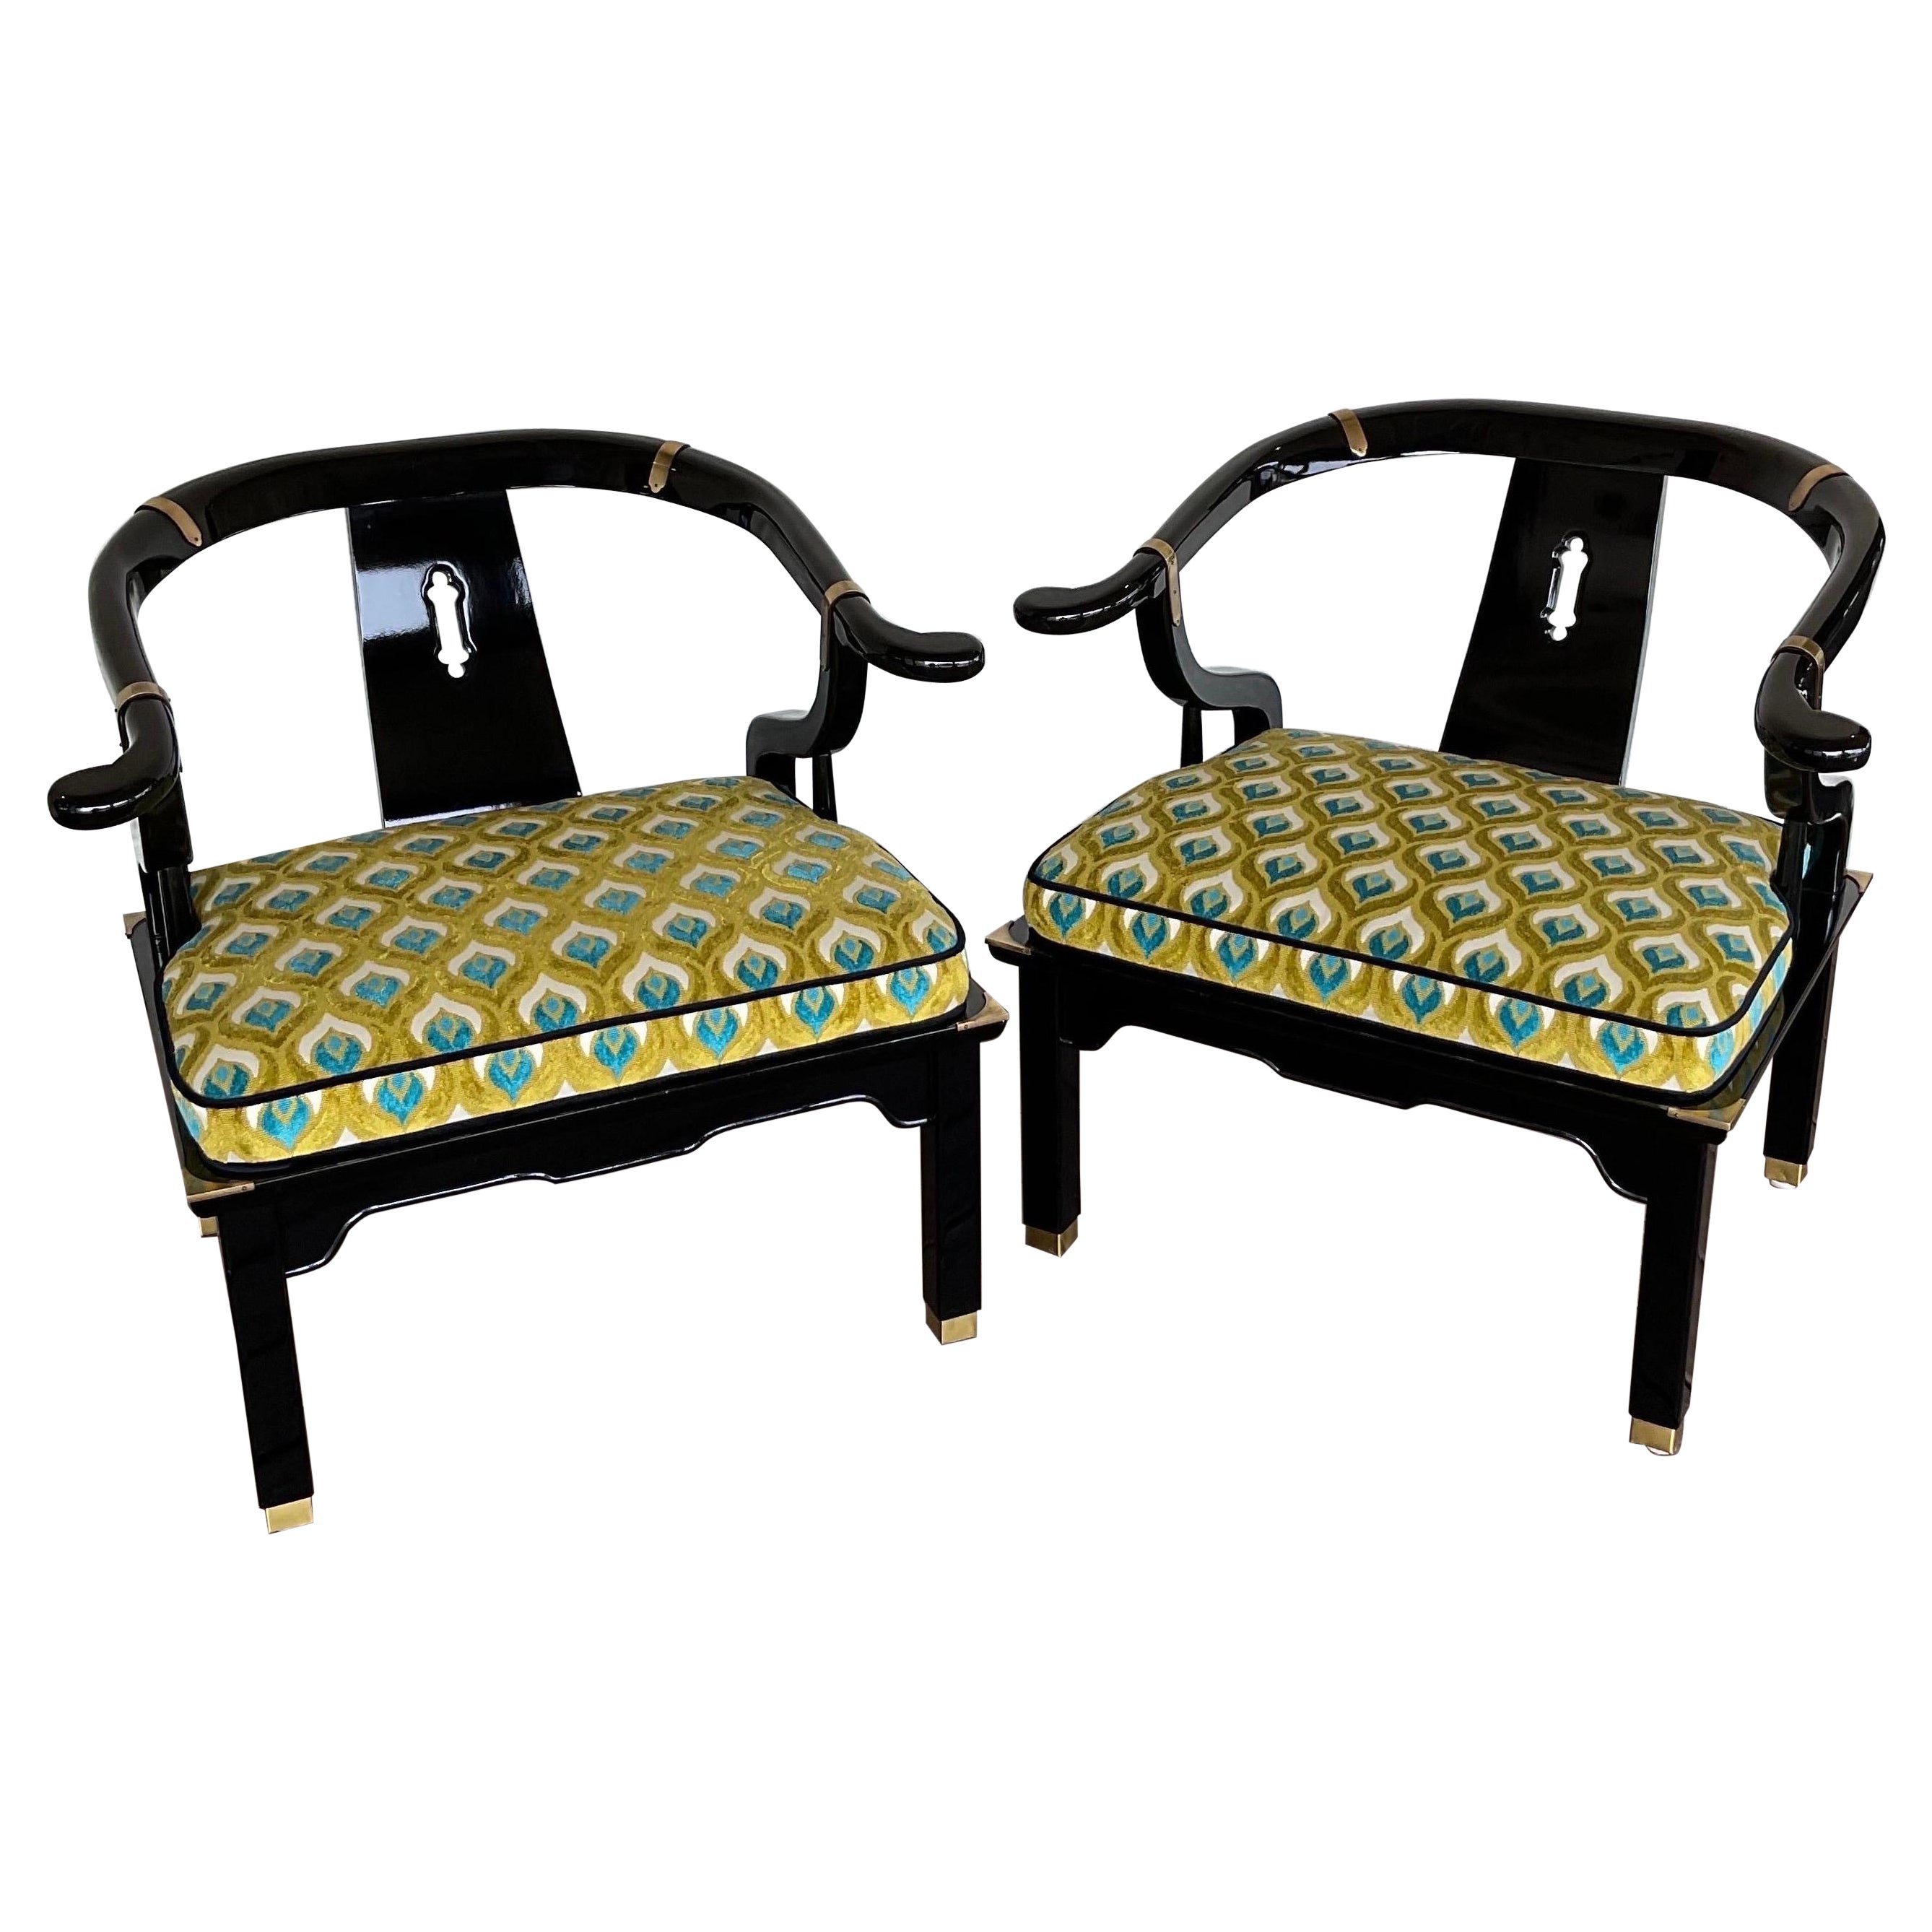 Expertly Reupholstered Black Lacquered Chinoiserie Chairs by Century Furniture